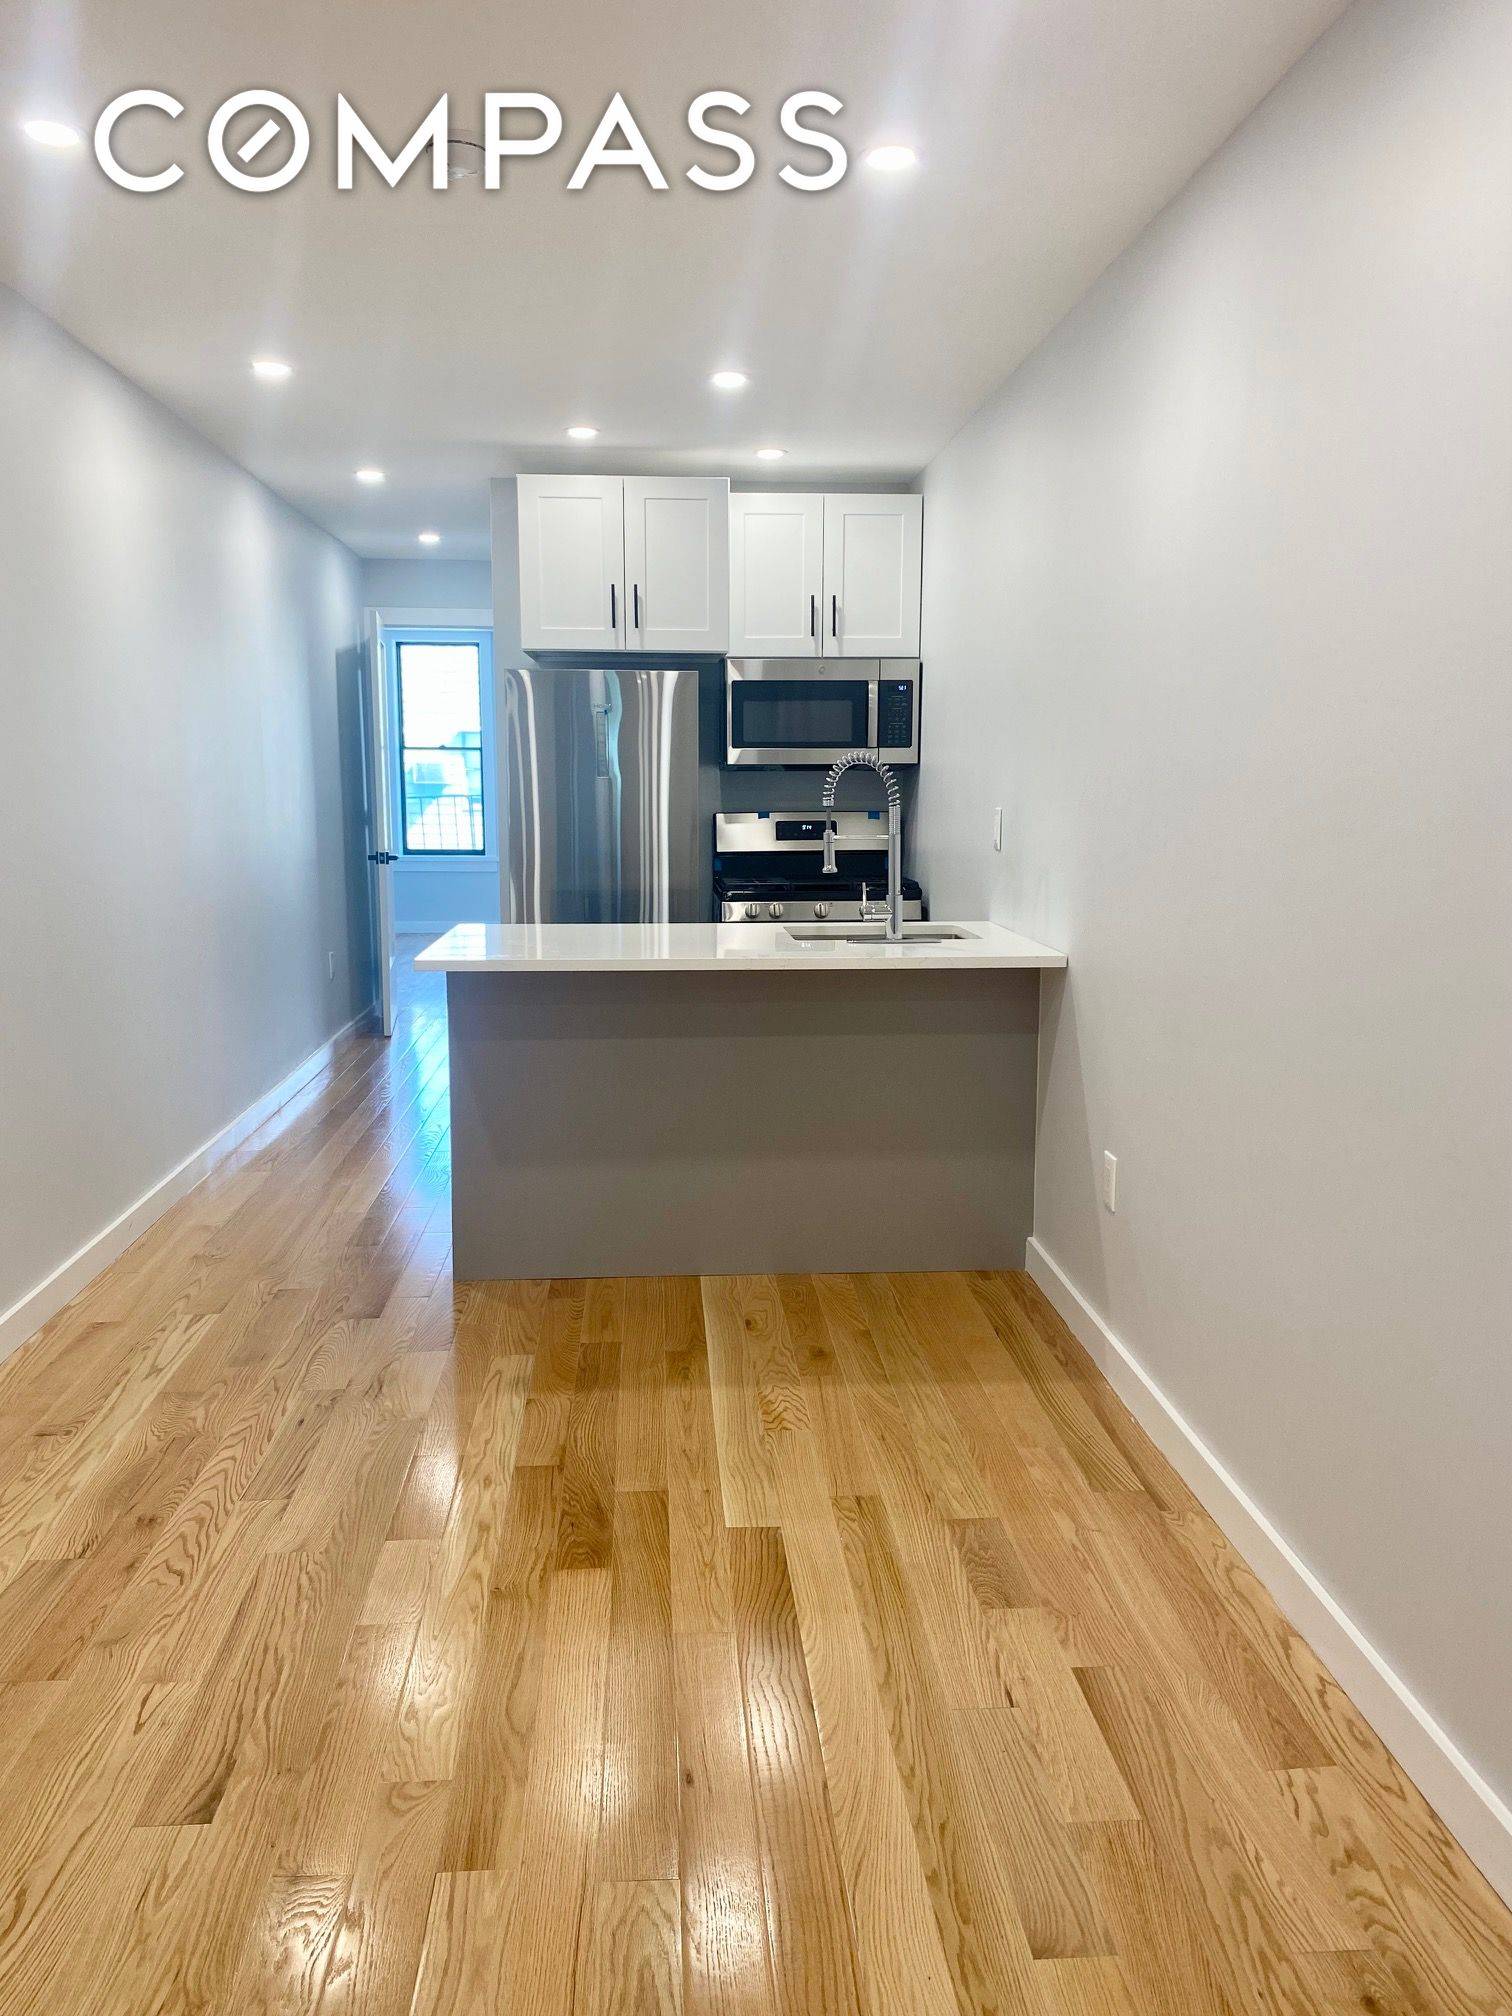 Move into a gut renovated two bedroom two bath apartment by McGolrick Park.